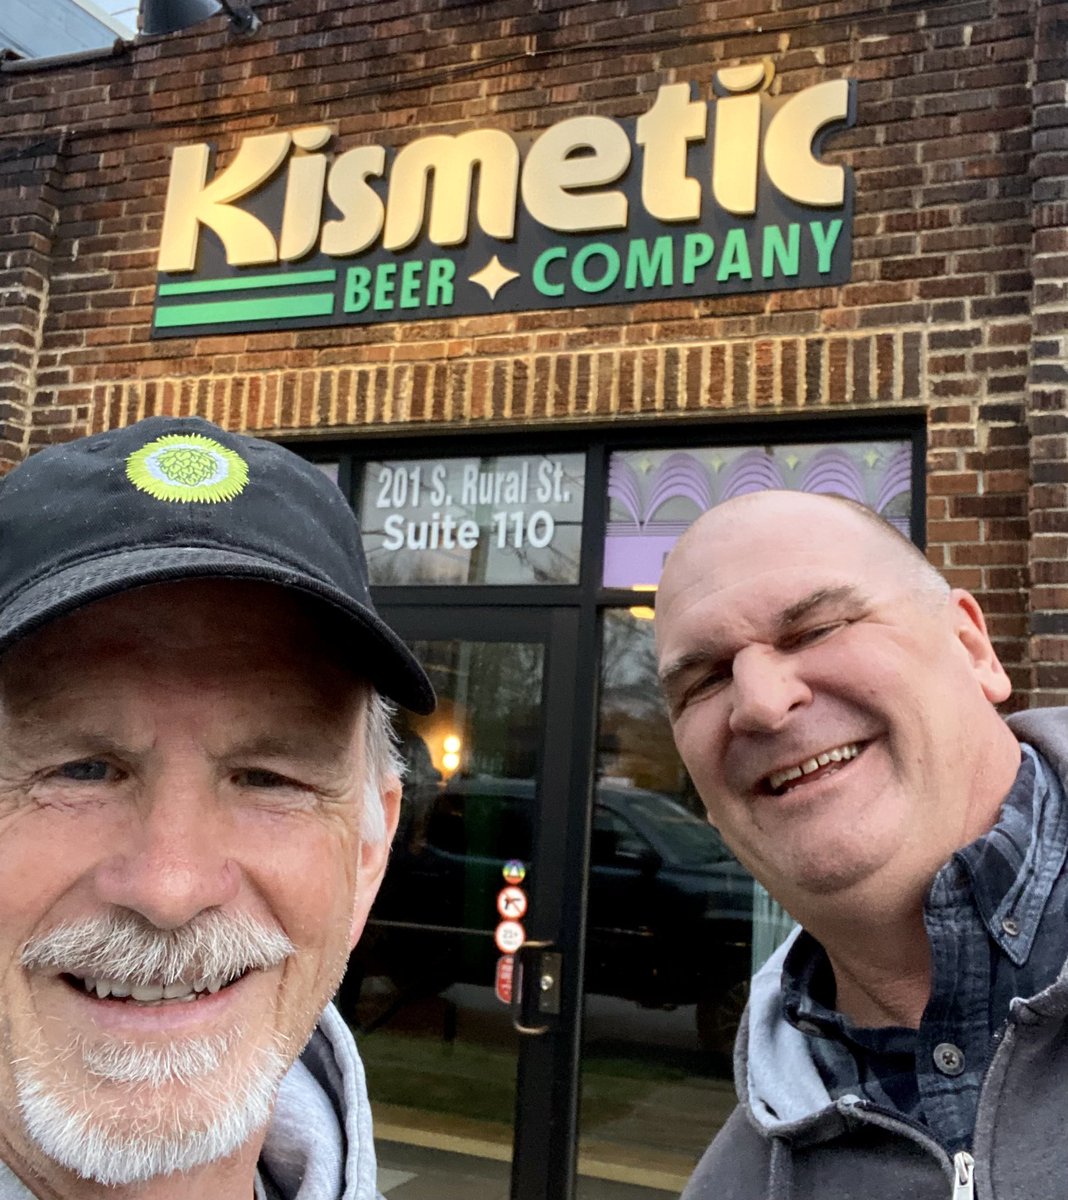 I had a great time sharing a beer with @MikeSlomba (Squatchy Brew Dude) at #KismeticBrewing today. Be sure to check out his fun YouTube beer videos!